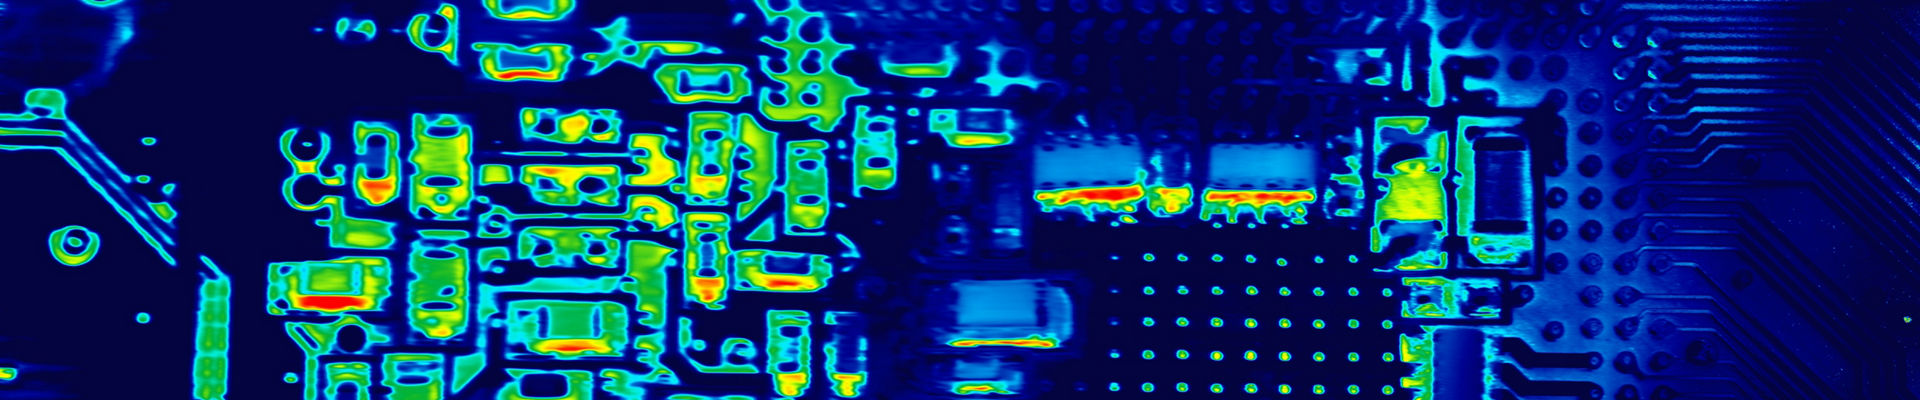 Infrared image of an electronic printed circuit board